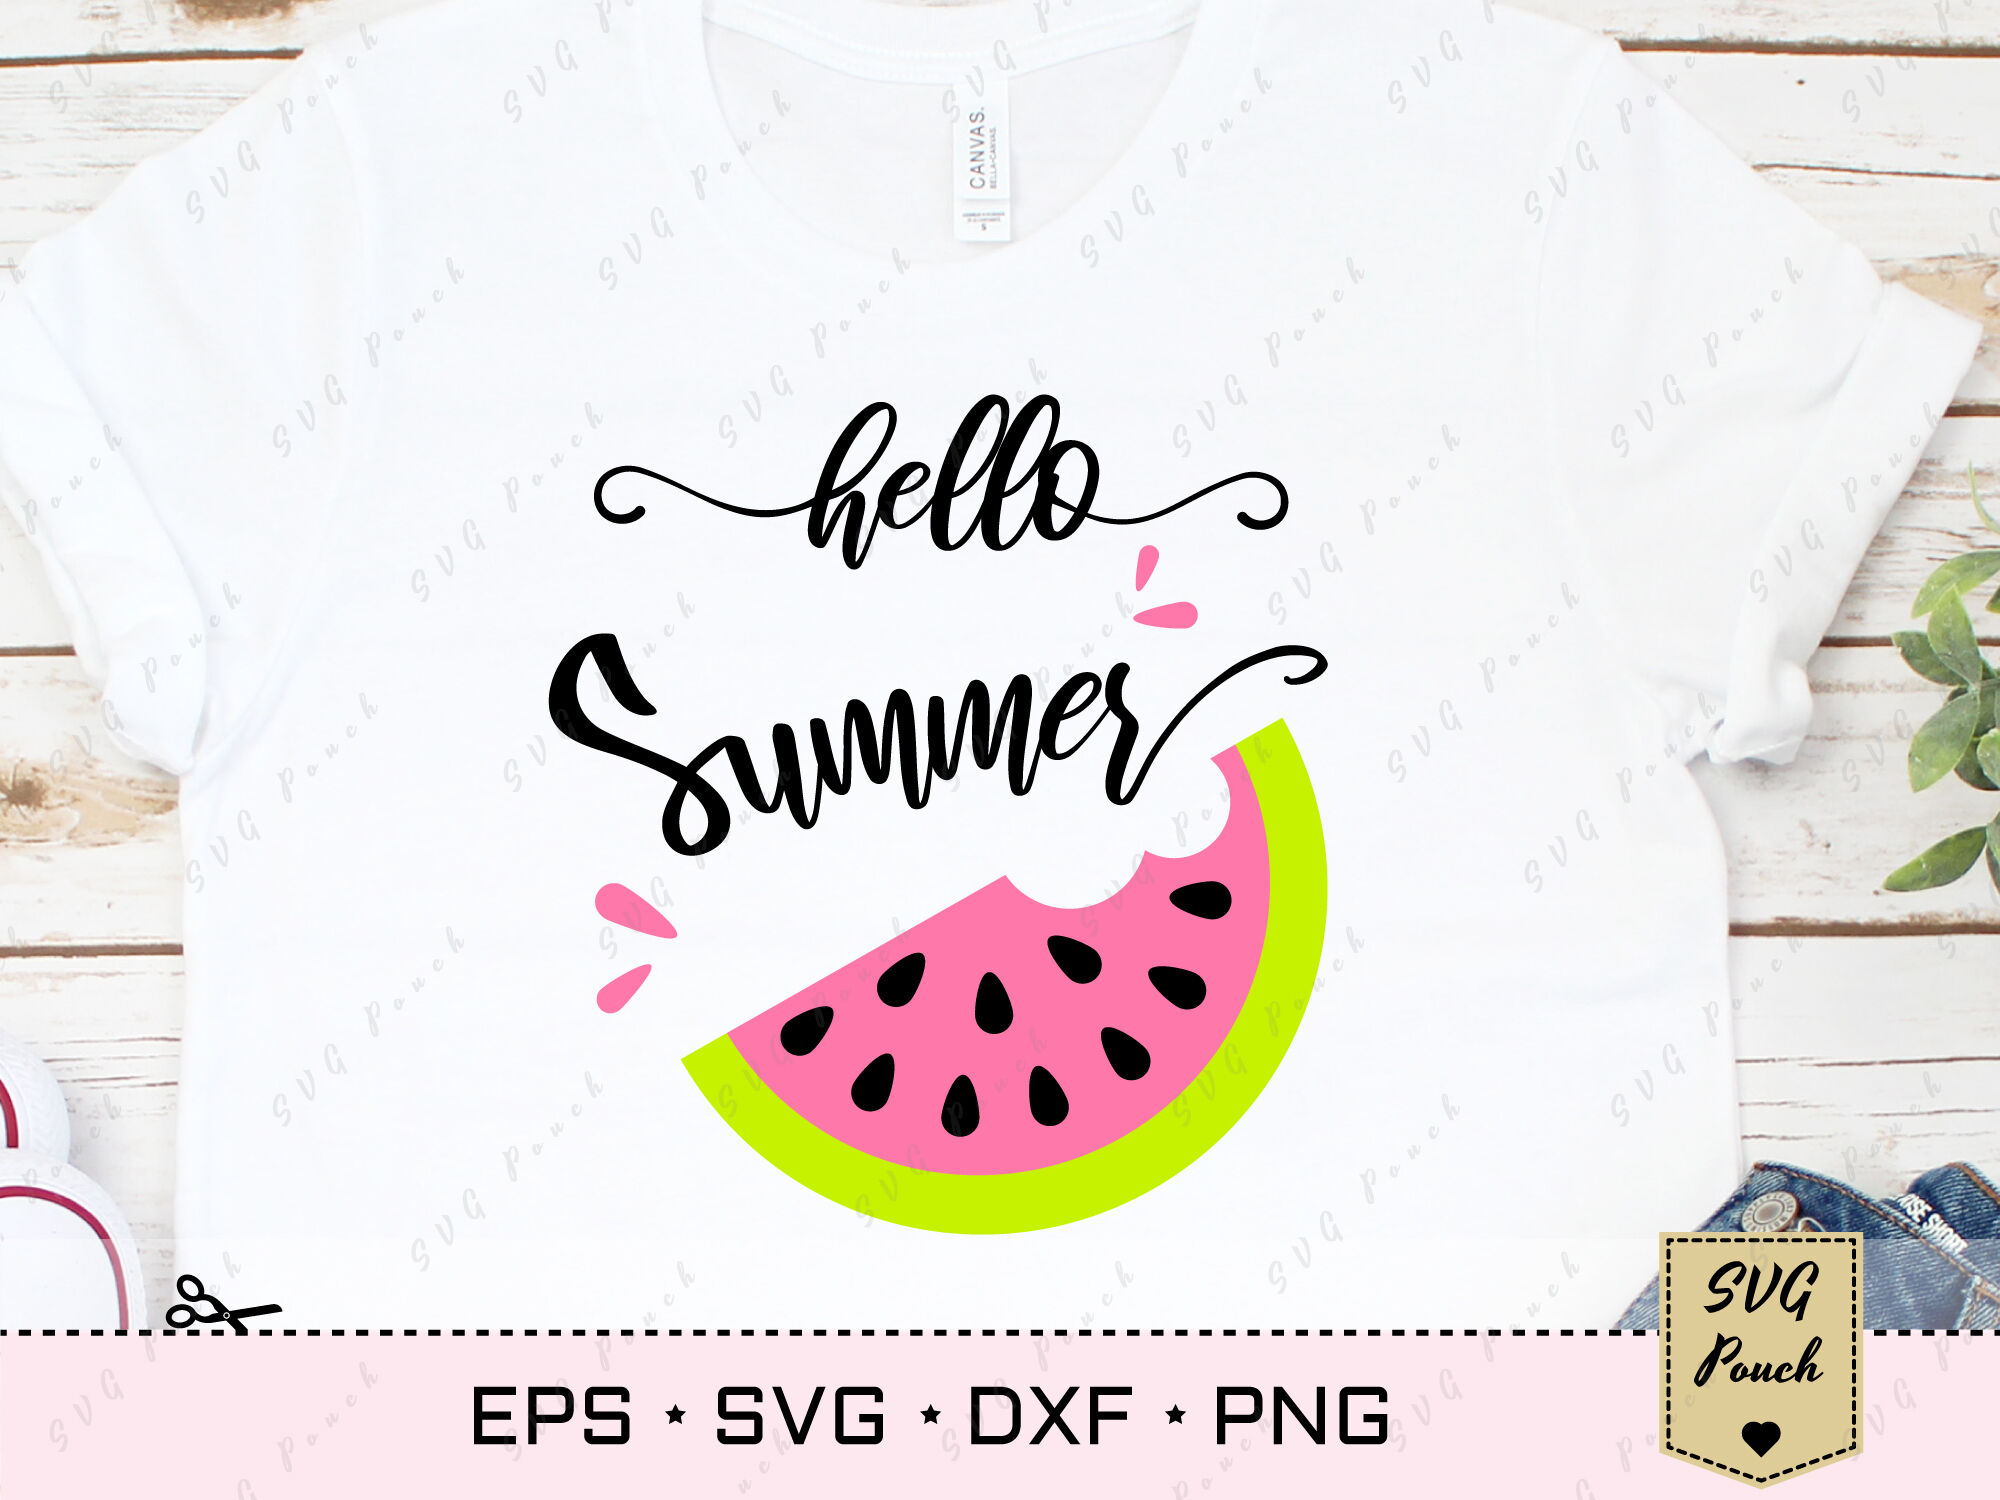 Hello Summer Watermelon Svg By Svgpouch Thehungryjpeg Com